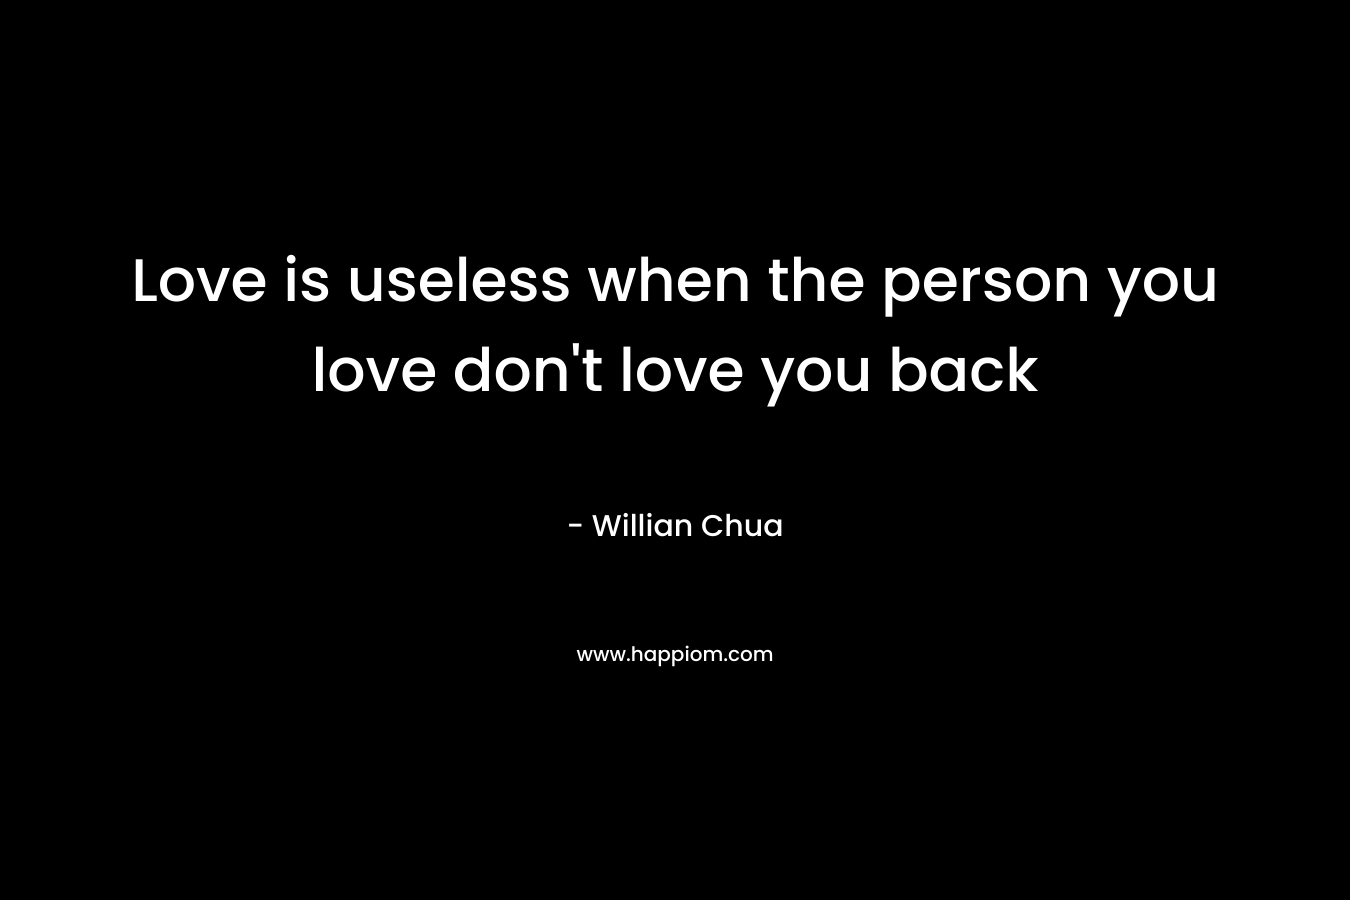 Love is useless when the person you love don’t love you back – Willian Chua